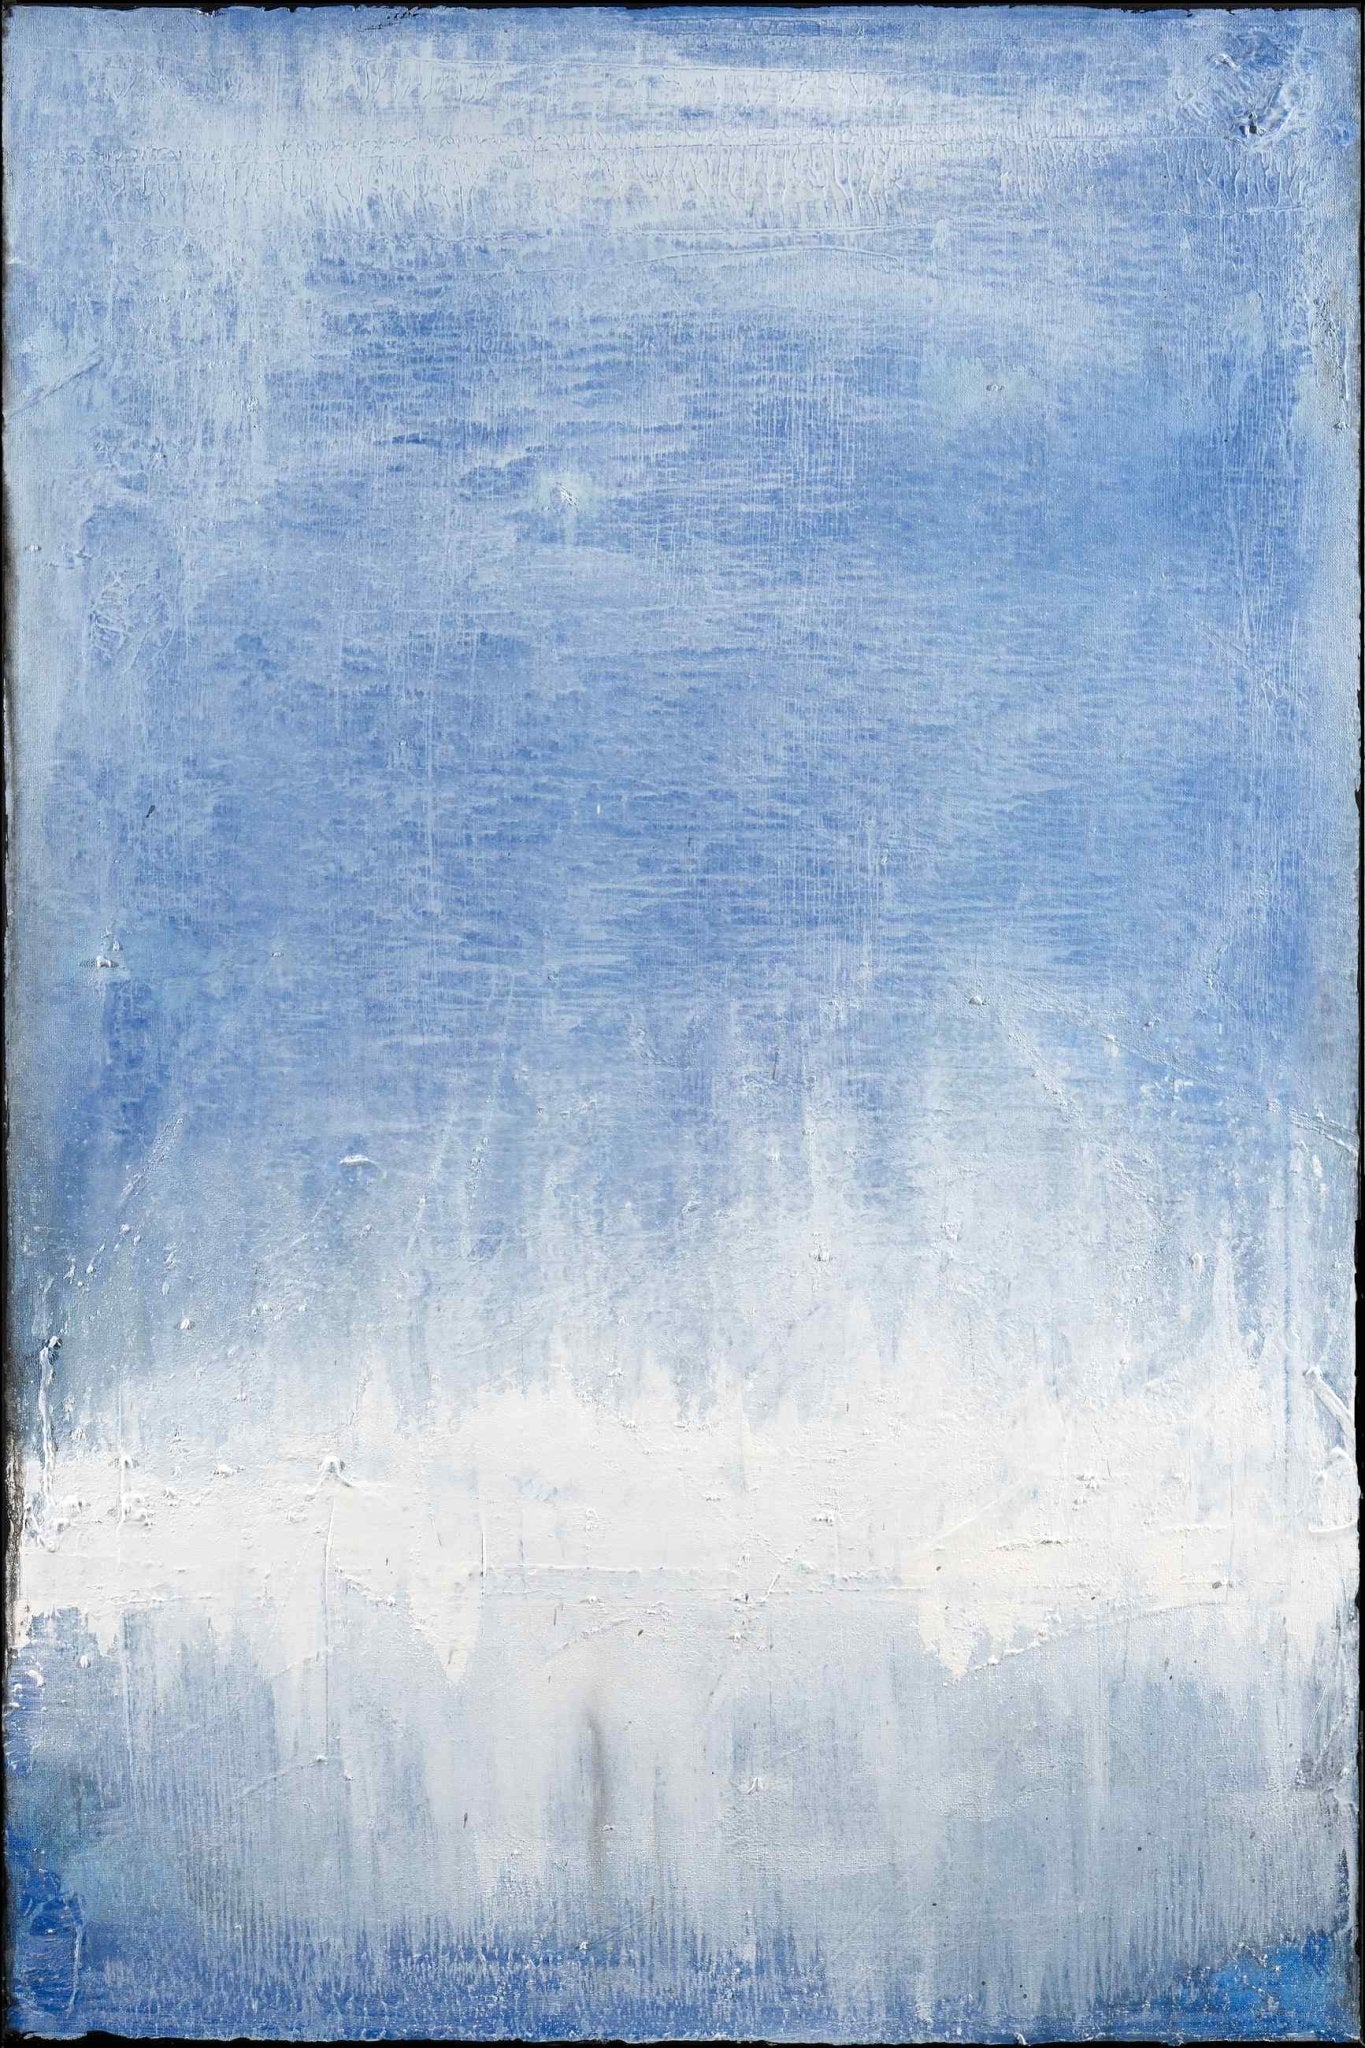 Light and Blue - The Curators